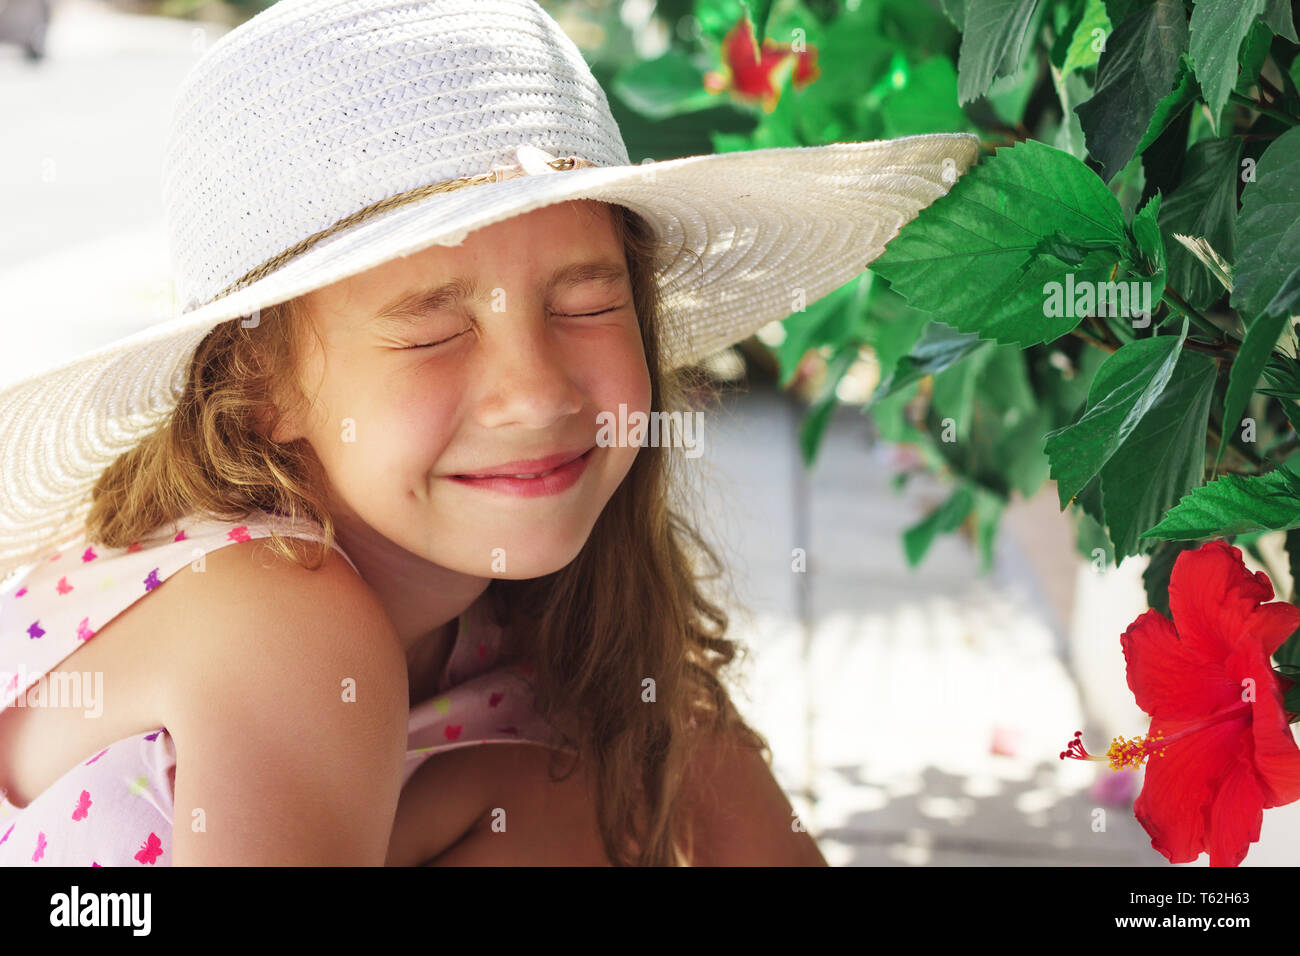 Beautiful little Girl looking at red flower and smiling in summer park. Happy cute kid playing outdoors. Stock Photo